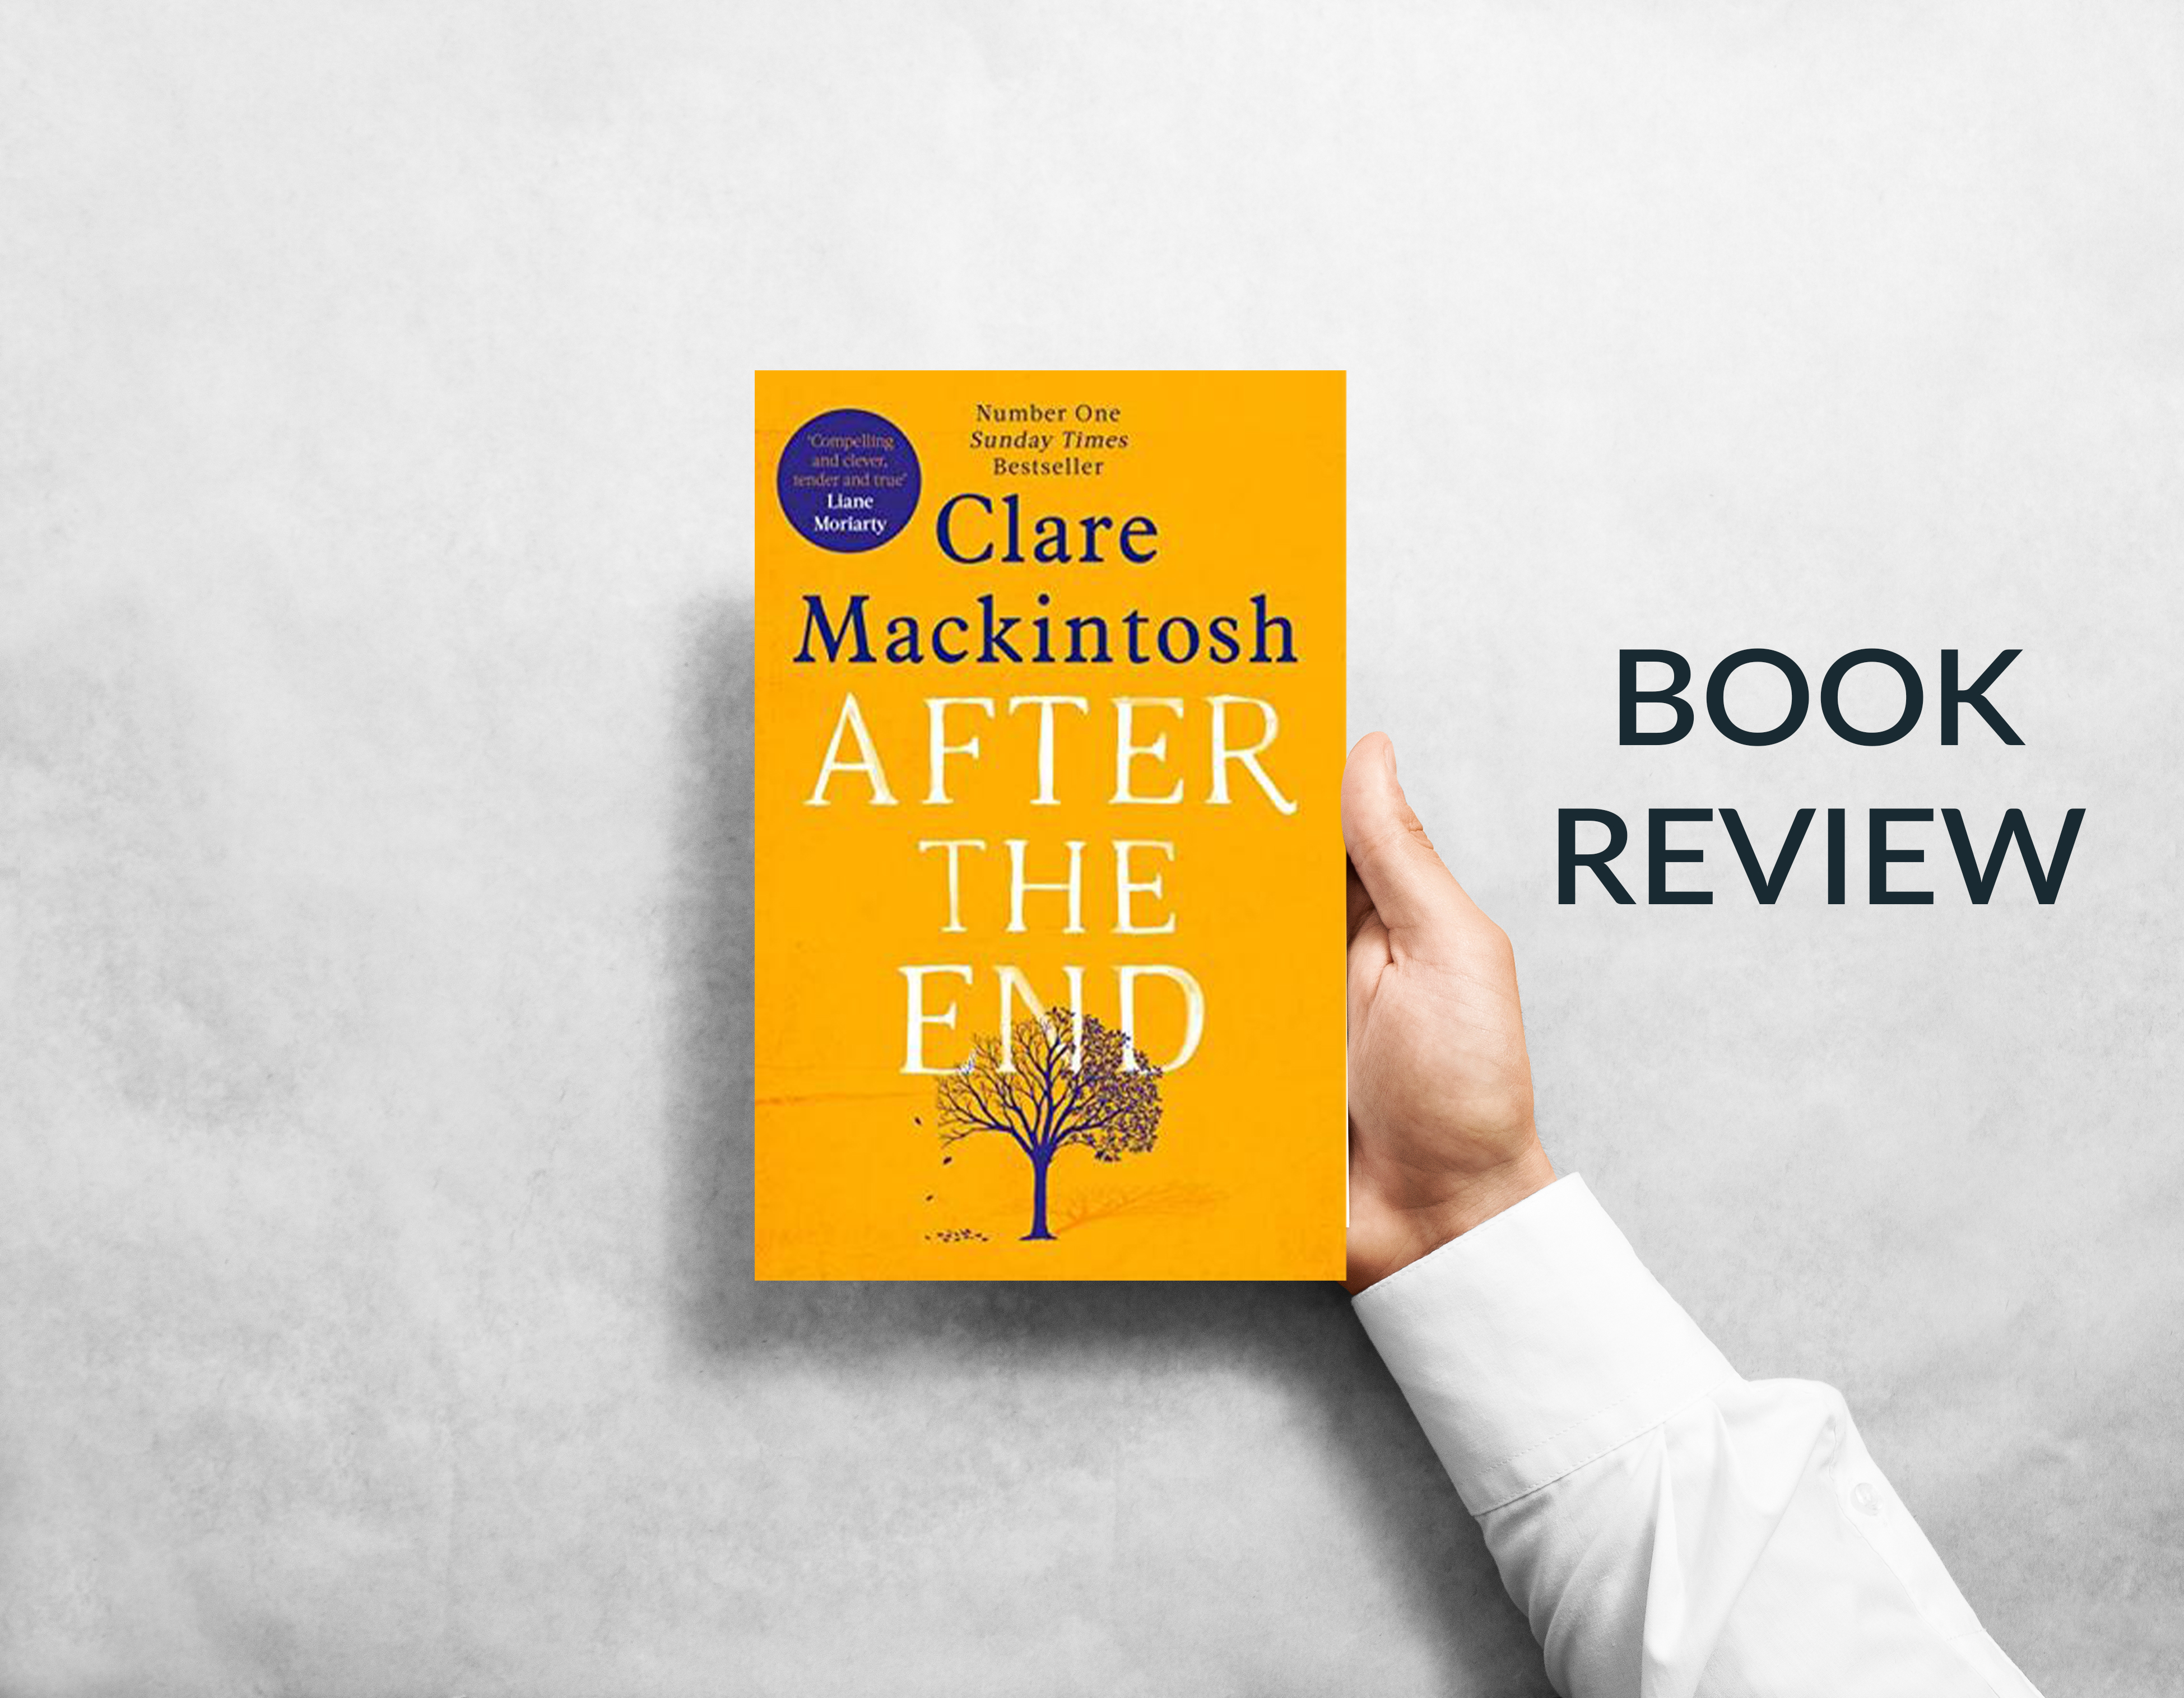 After The End by Clare Mackintosh - Book Review